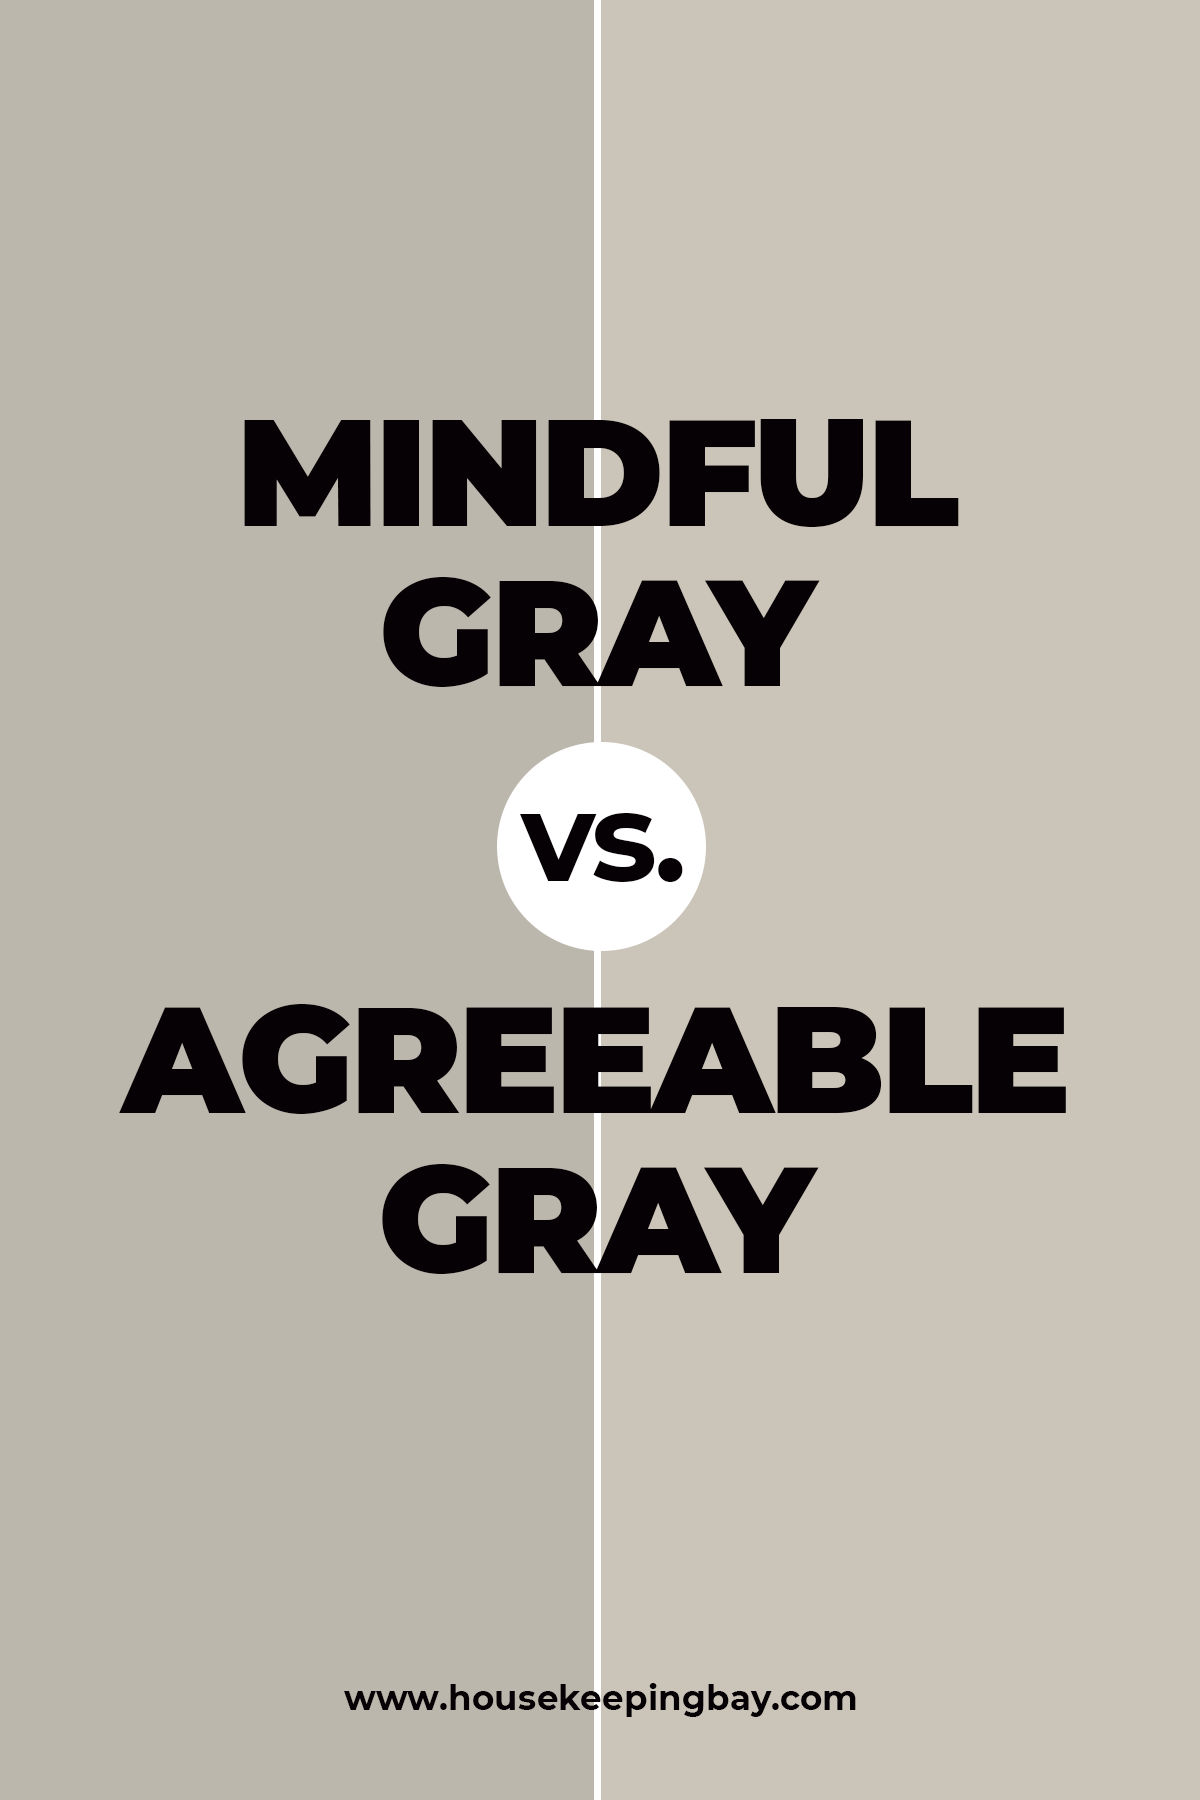 Mindful Gray vs. Agreeable Gray